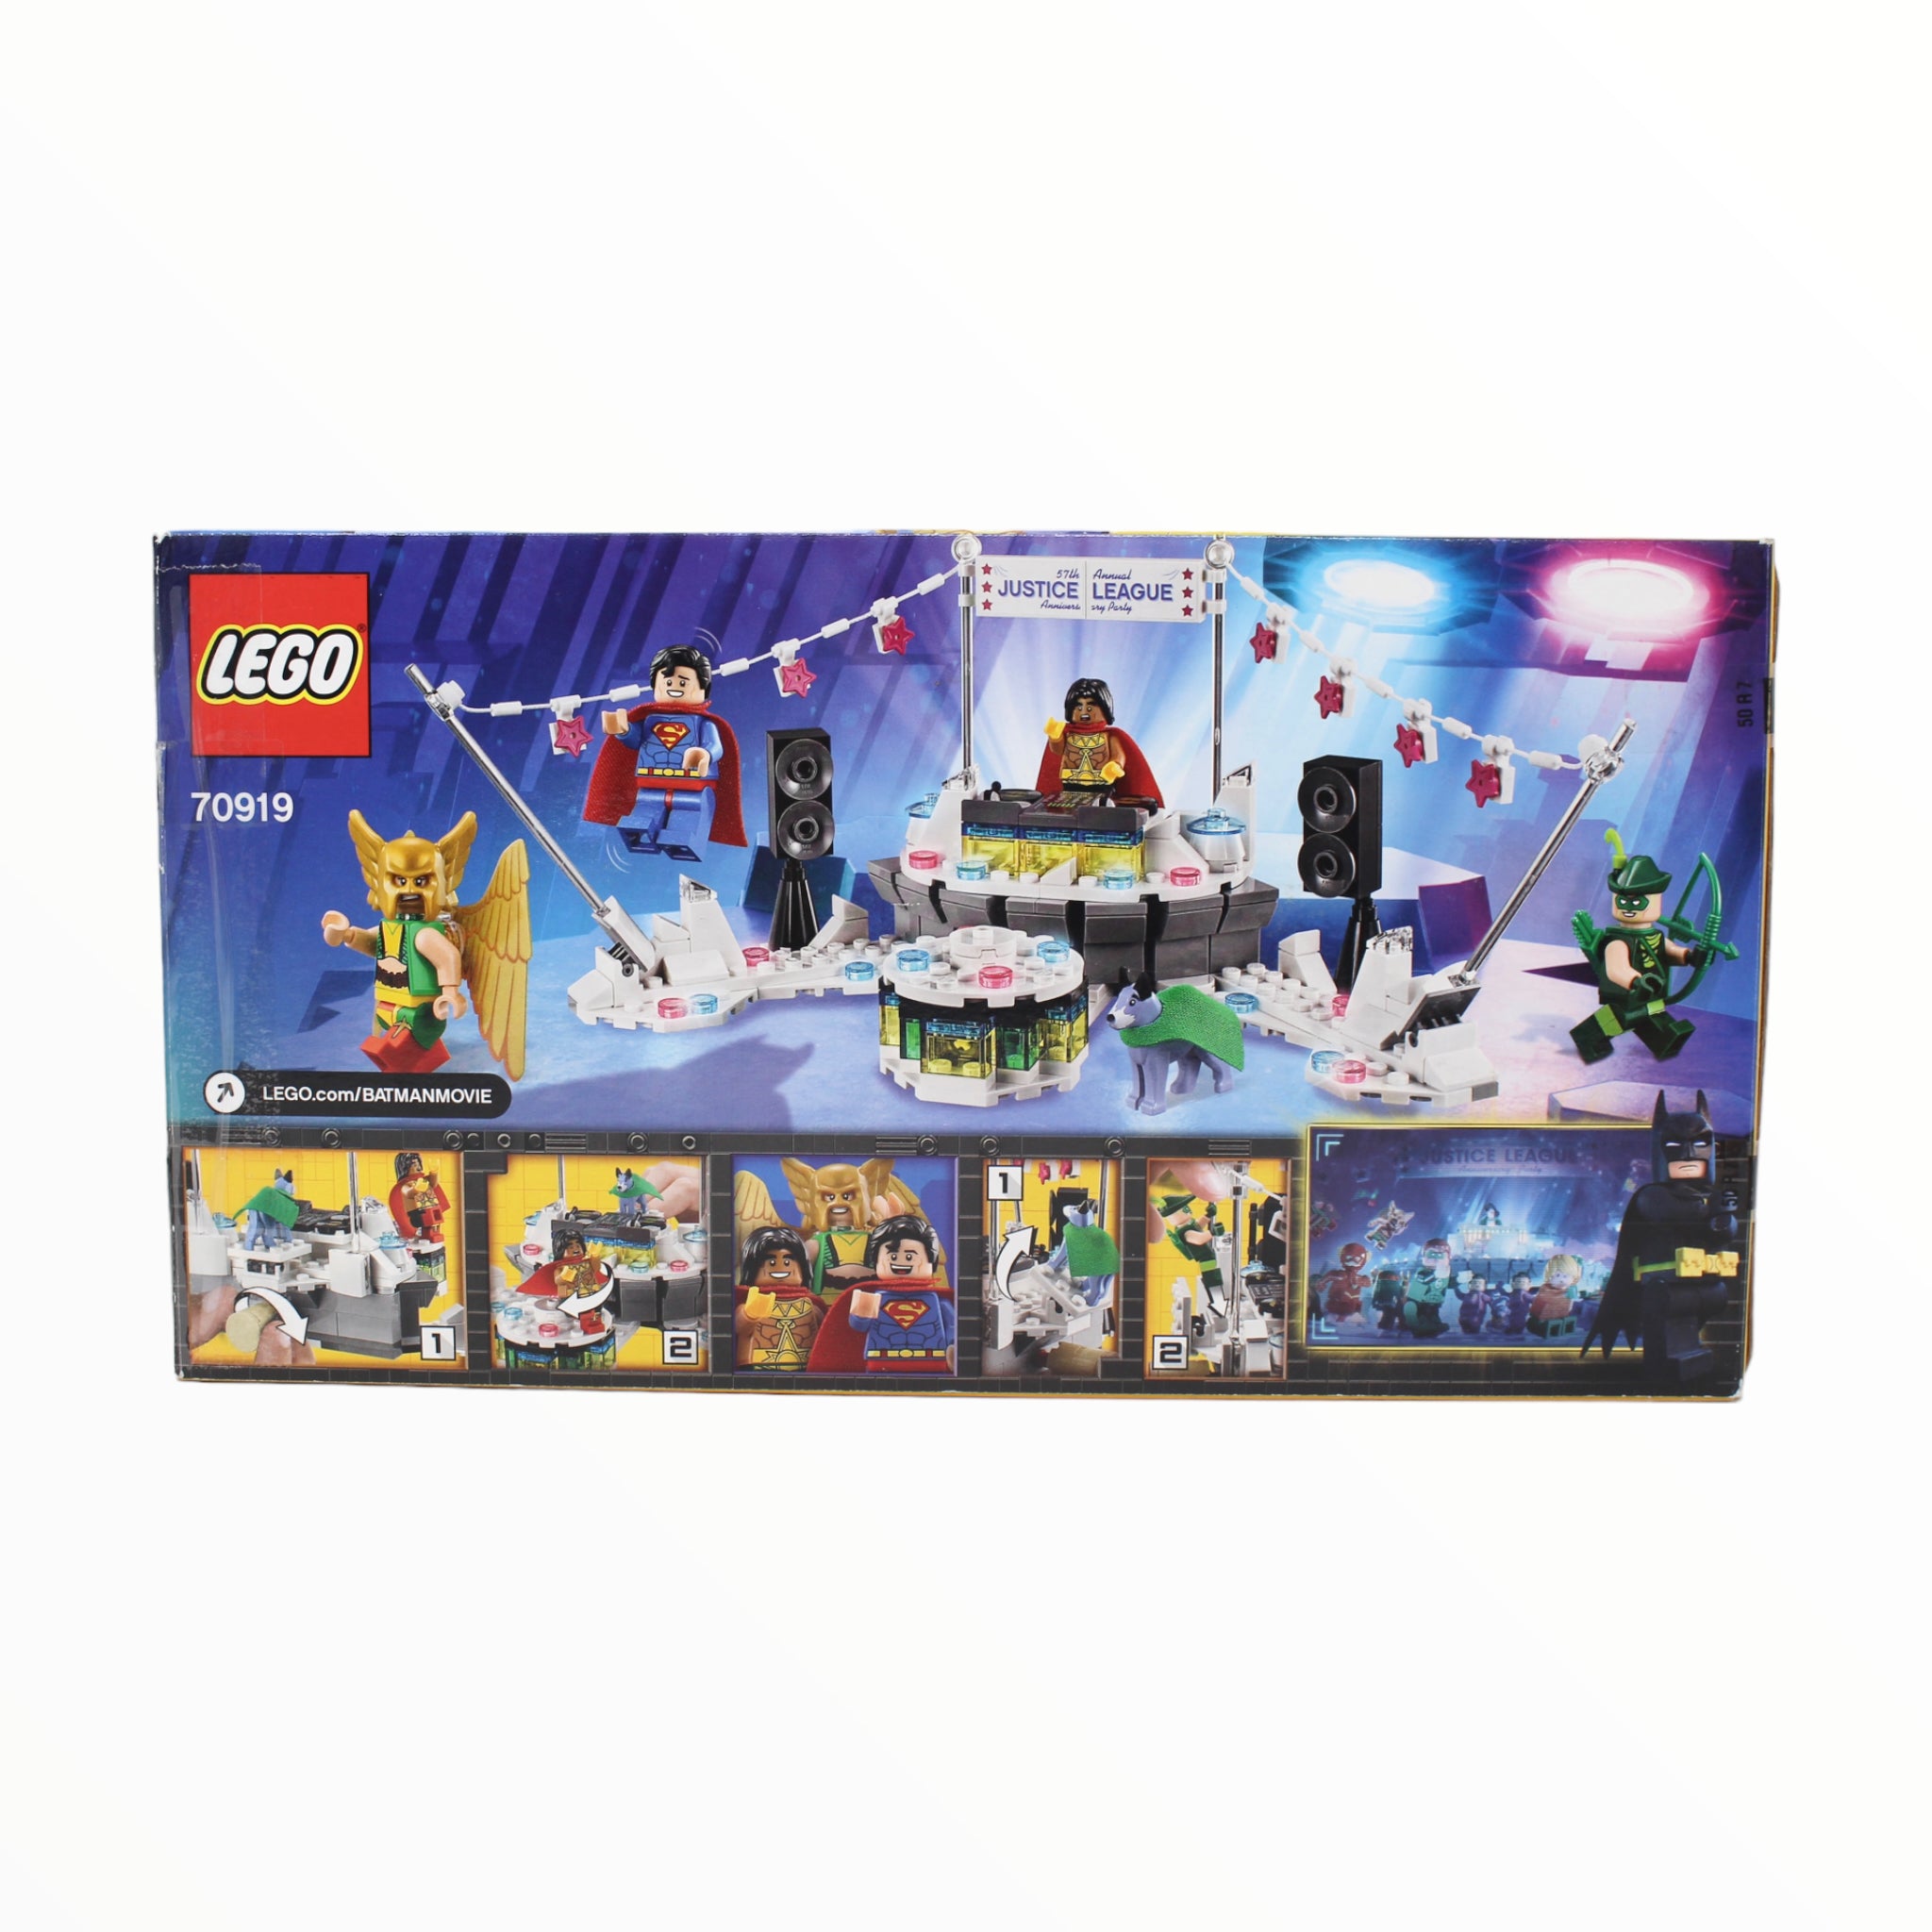 Certified Used Set 70919 The LEGO Batman Movie The Justice League Anniversary Party